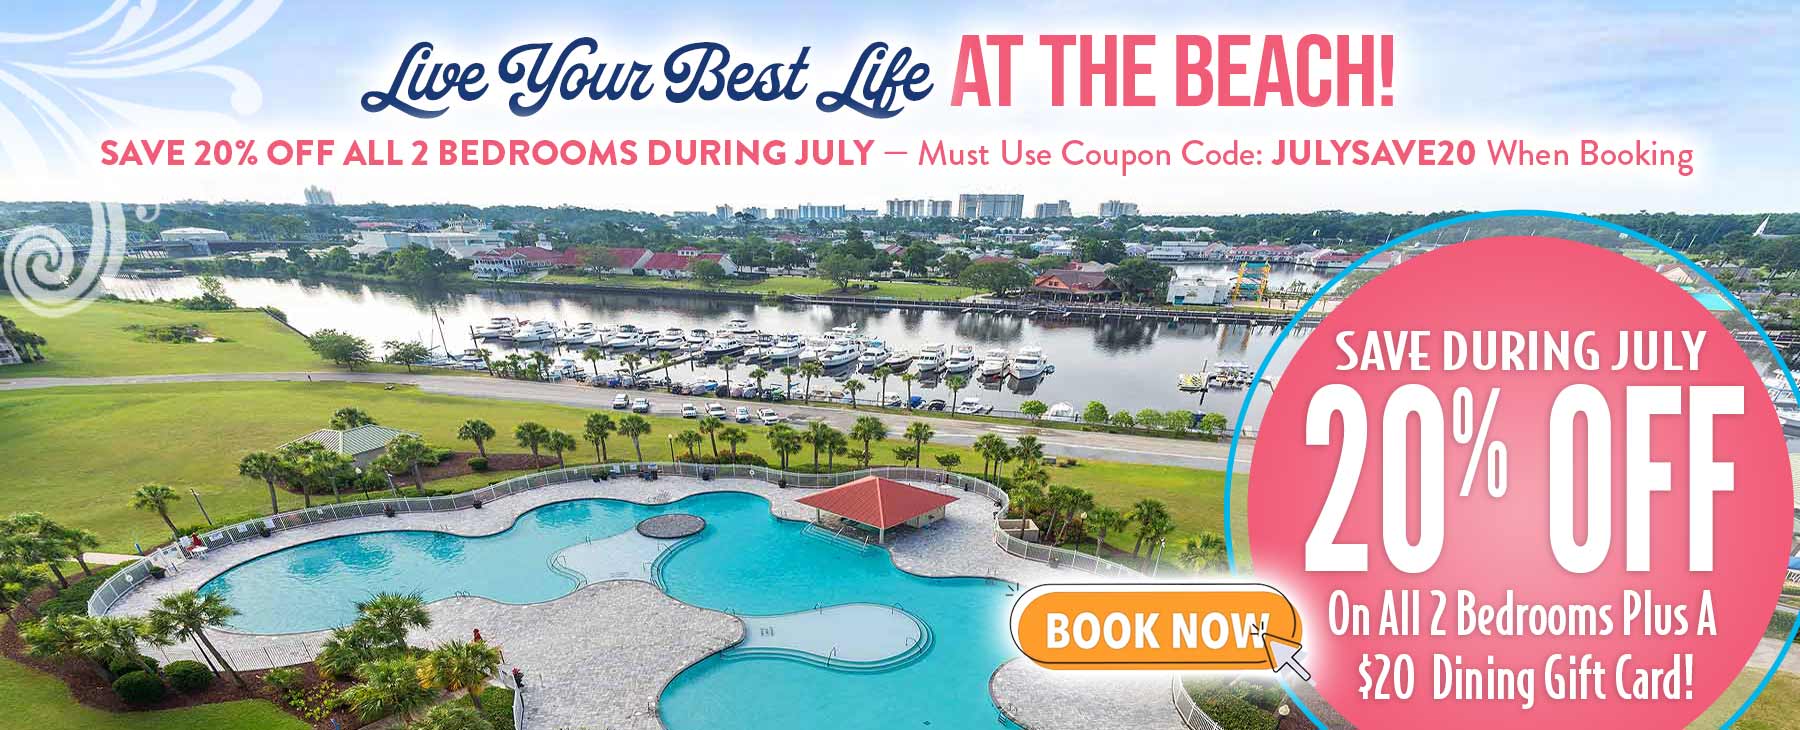 Save 20% Off All 2 Bedrooms During July — Must Use Coupon Code: JULYSAVE20 When Booking